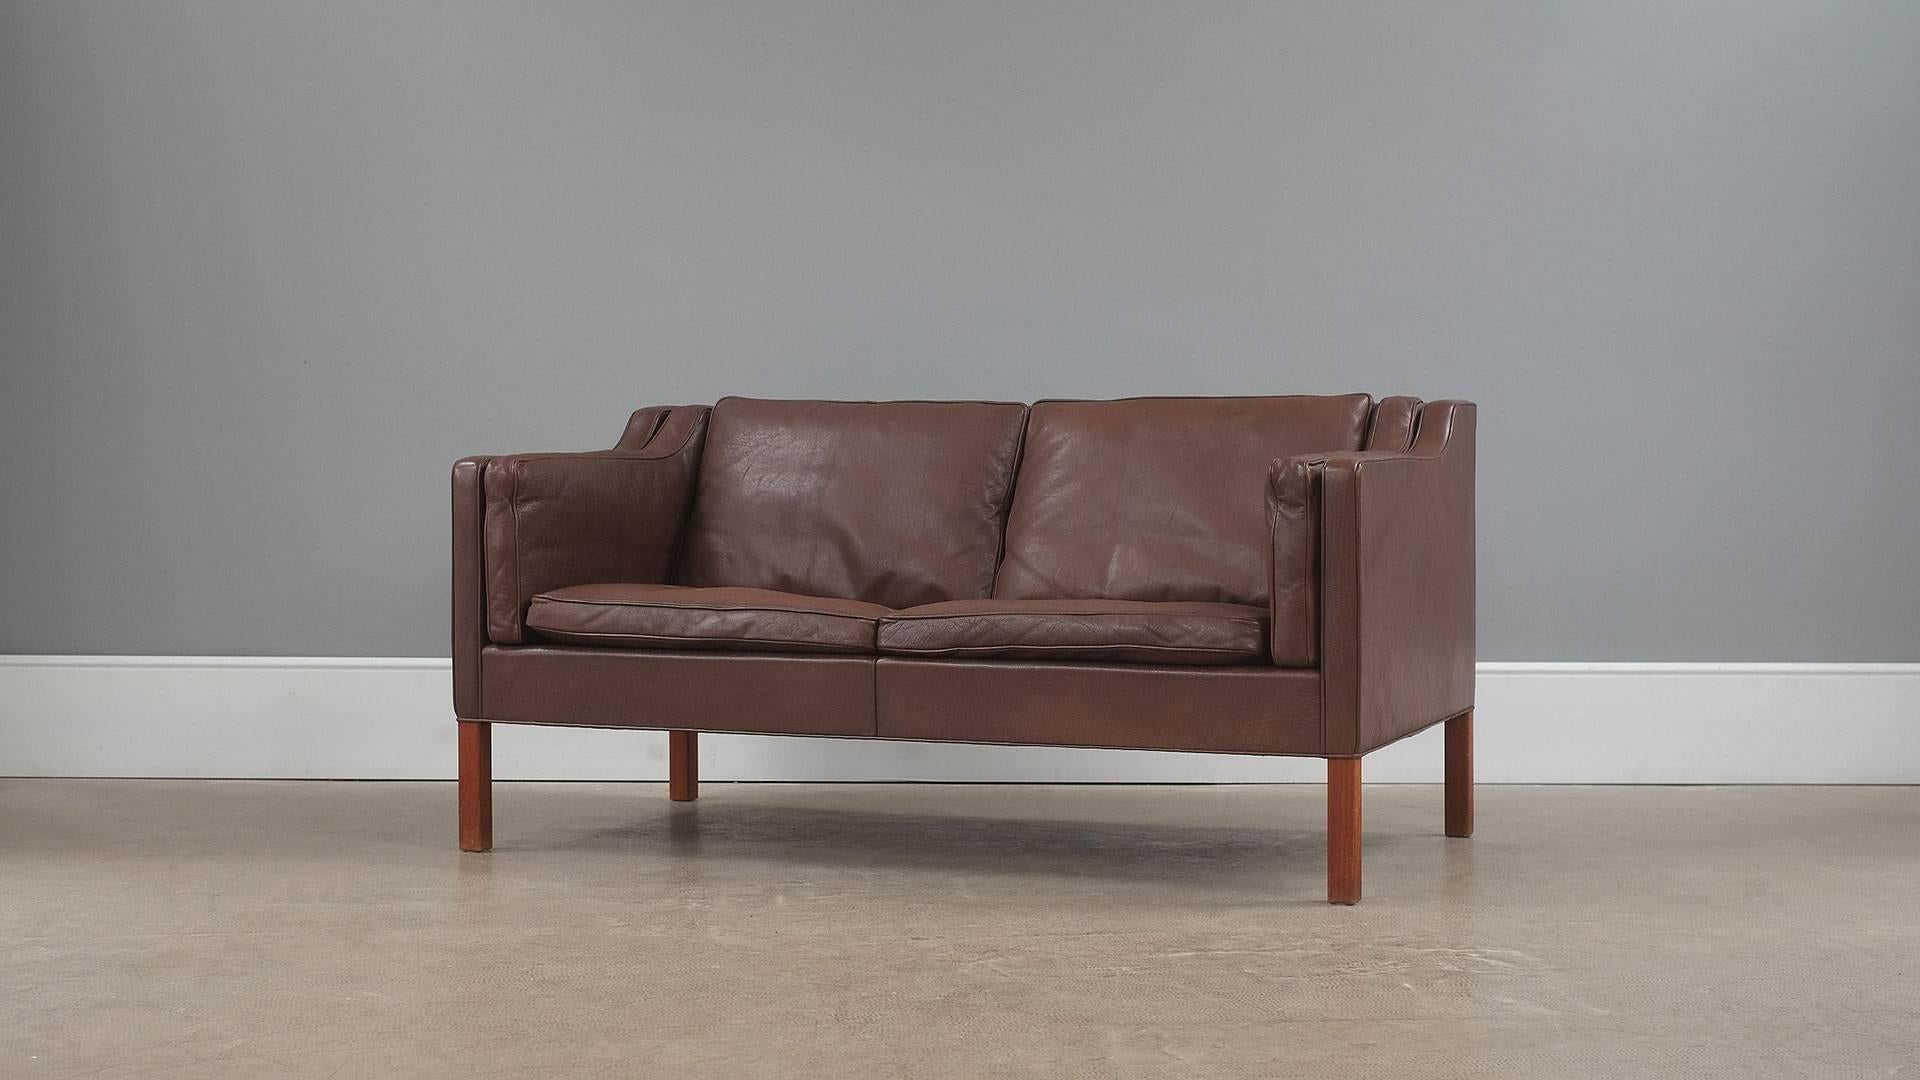 The real thing… Fantastic example of the classic 2 seat sofa designed by Borge Mogensen for Fredericia, Denmark model 2212. Unsurpassed quality and in beautiful brown leather with solid teak legs. Wonderful sofa.